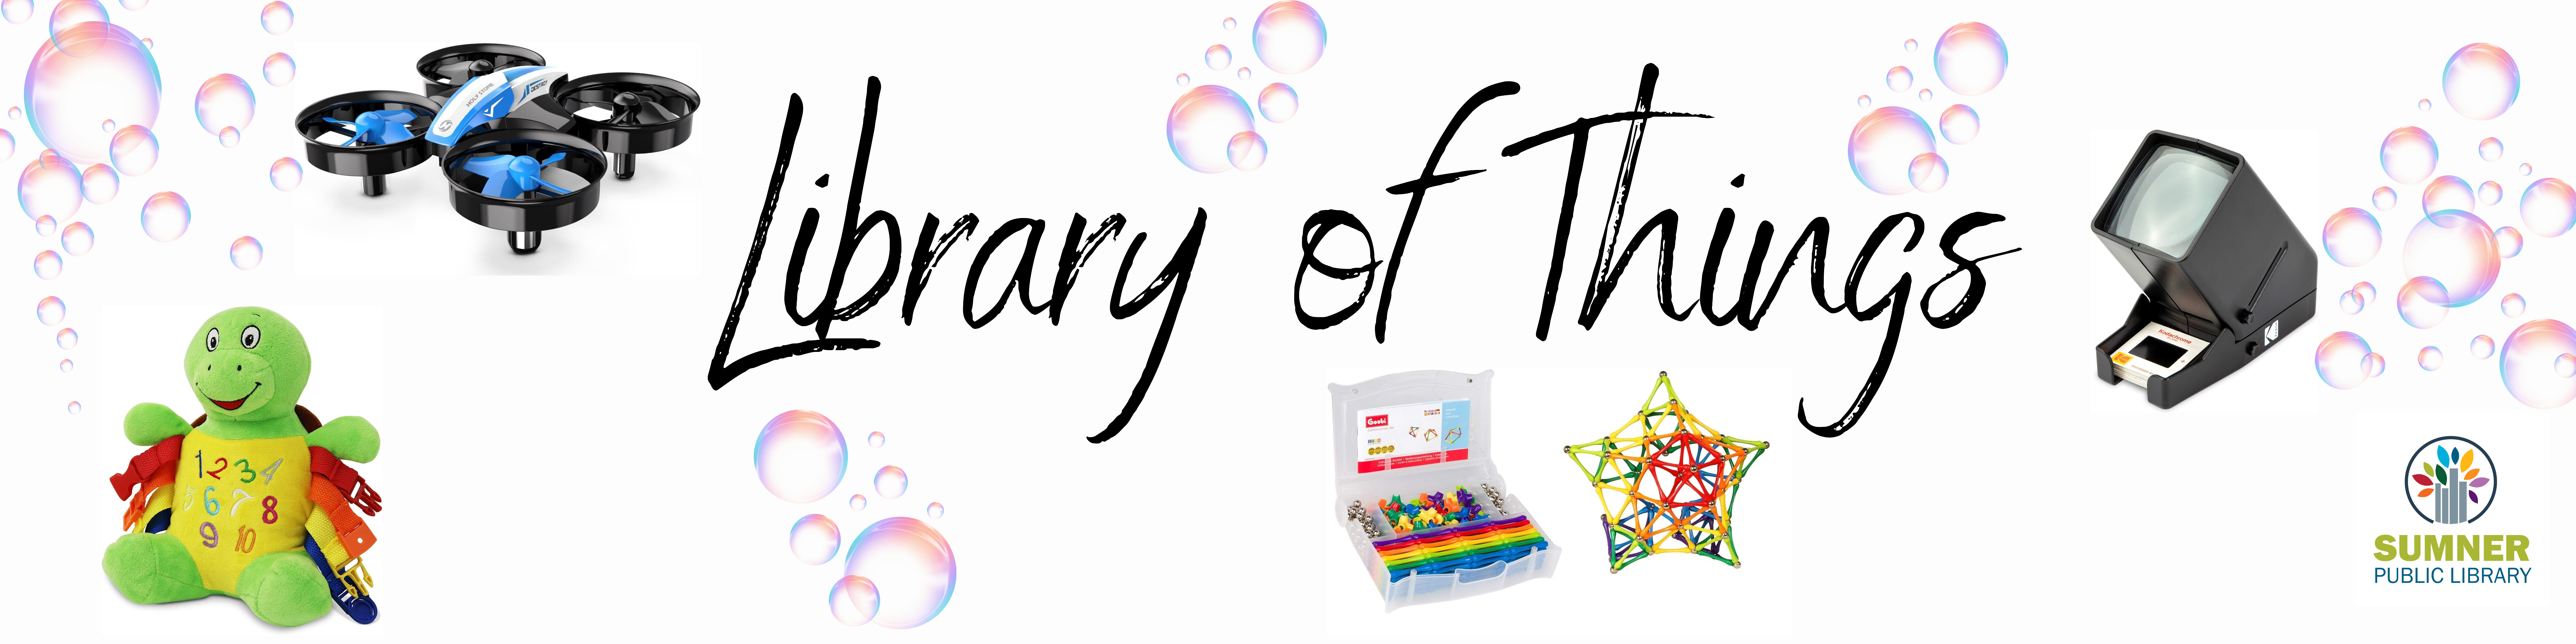 Library of Things Banner.png